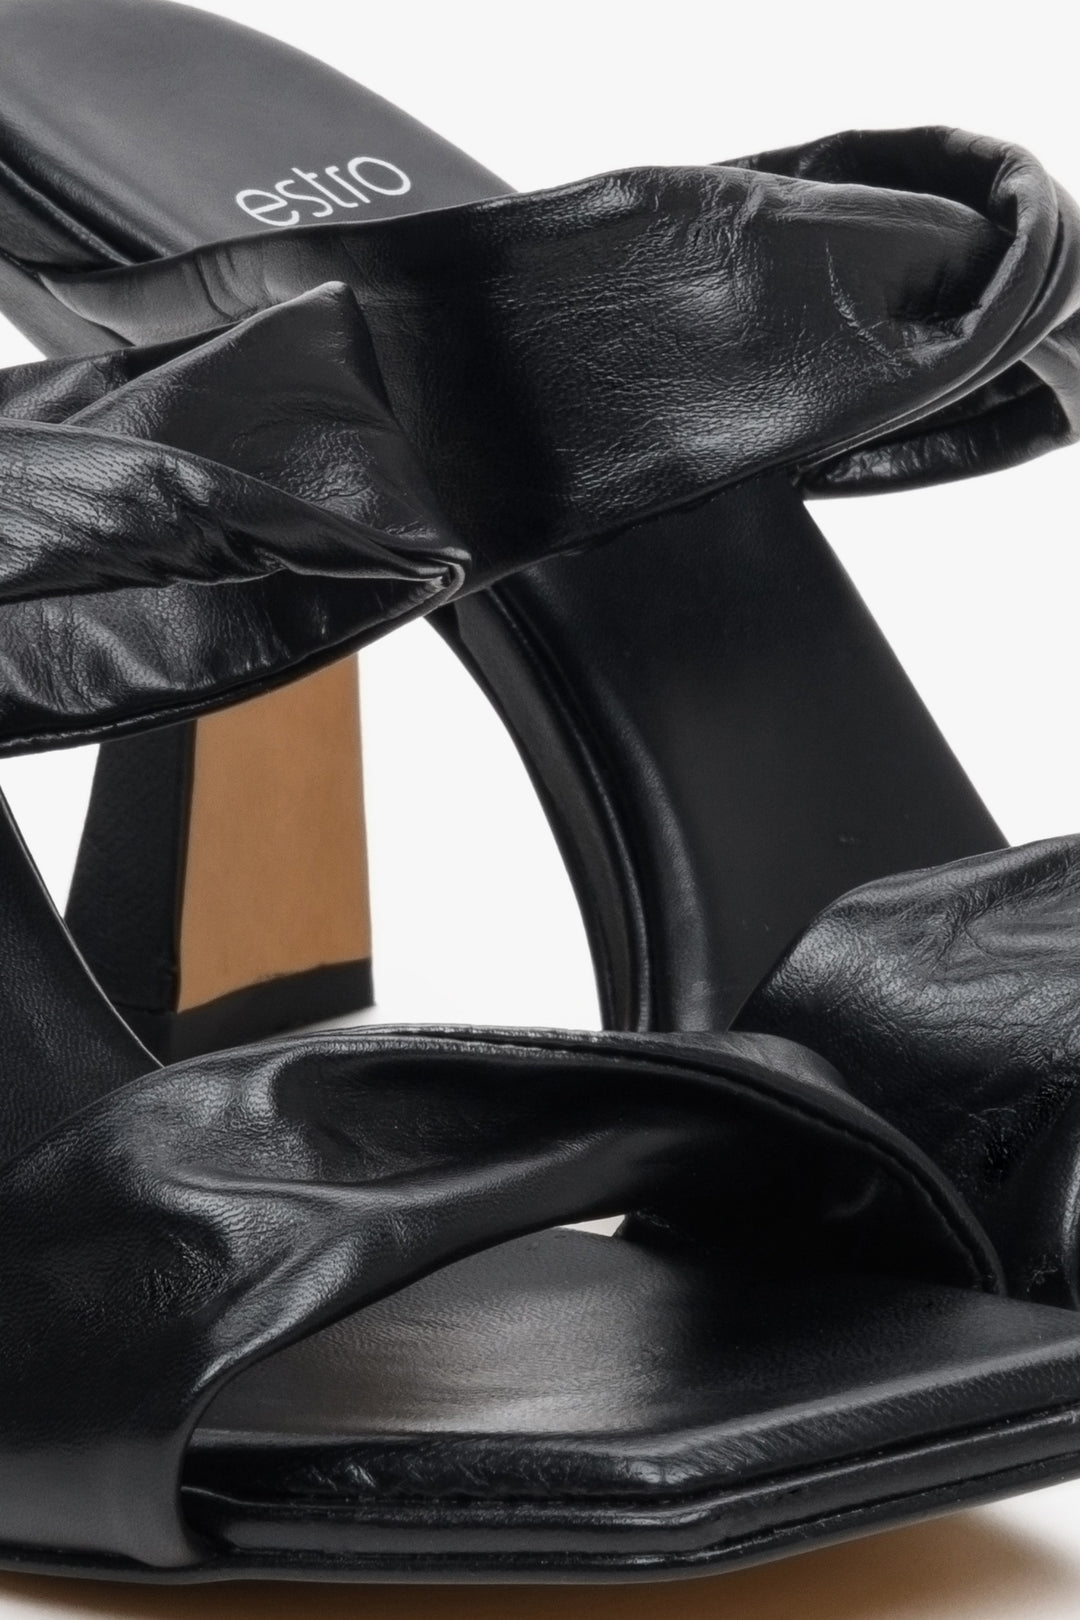 Women's black leather heeled sandals by Estro - close-up on details.